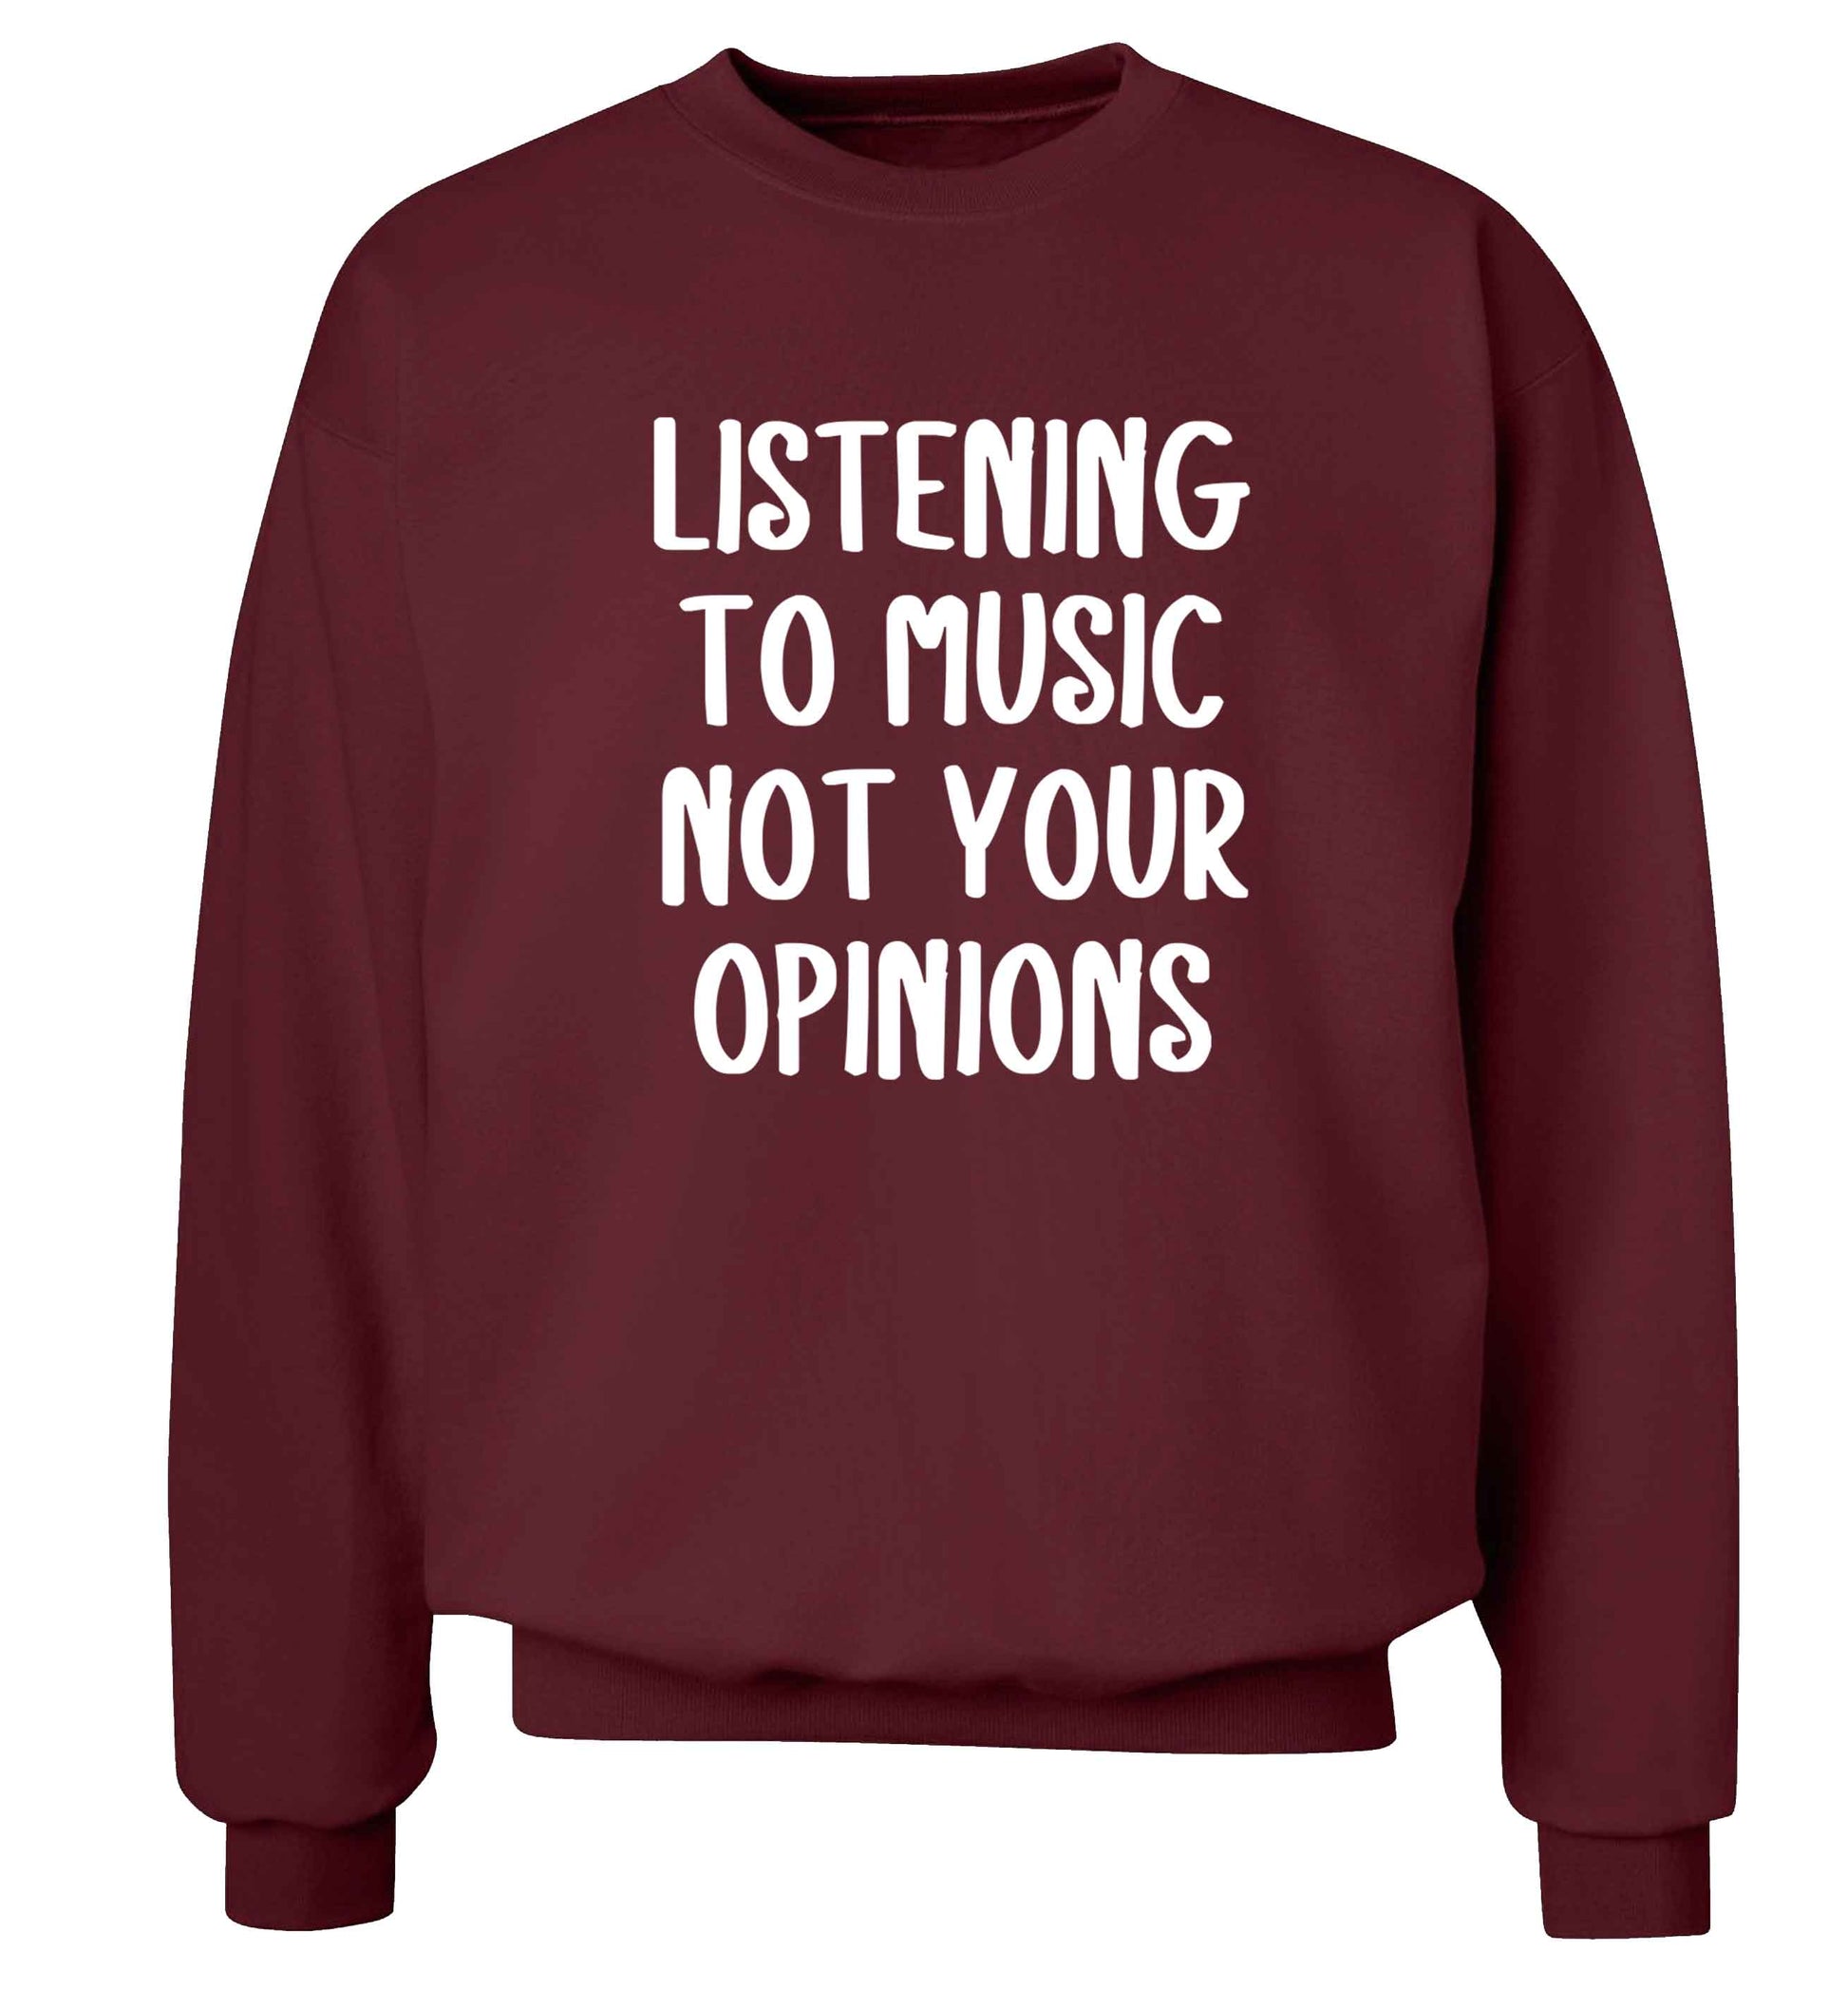 Listening to music not your opinions adult's unisex maroon sweater 2XL